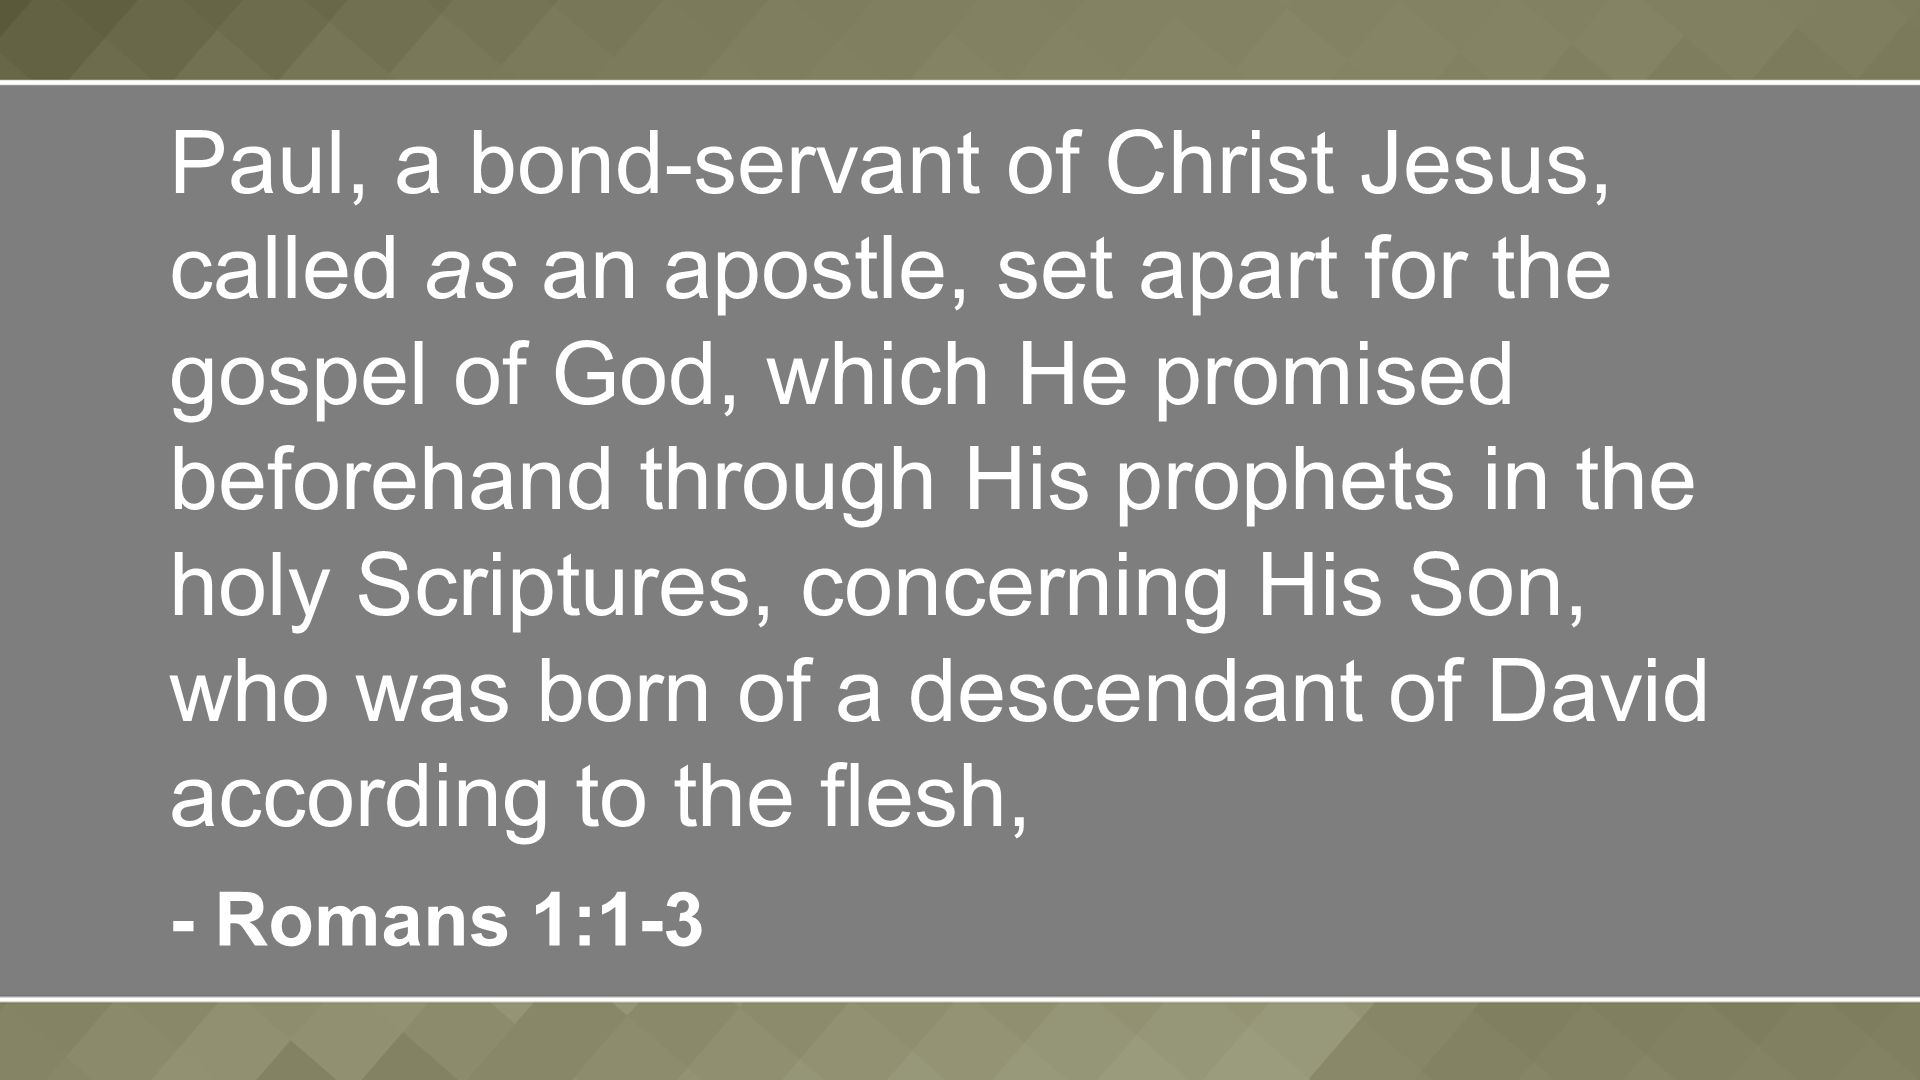 Paul, a bond-servant of Christ Jesus, called as an apostle, set apart for the gospel of God, which He promised beforehand through His prophets in the holy Scriptures, concerning His Son, who was born of a descendant of David according to the flesh, - Romans 1:1-3